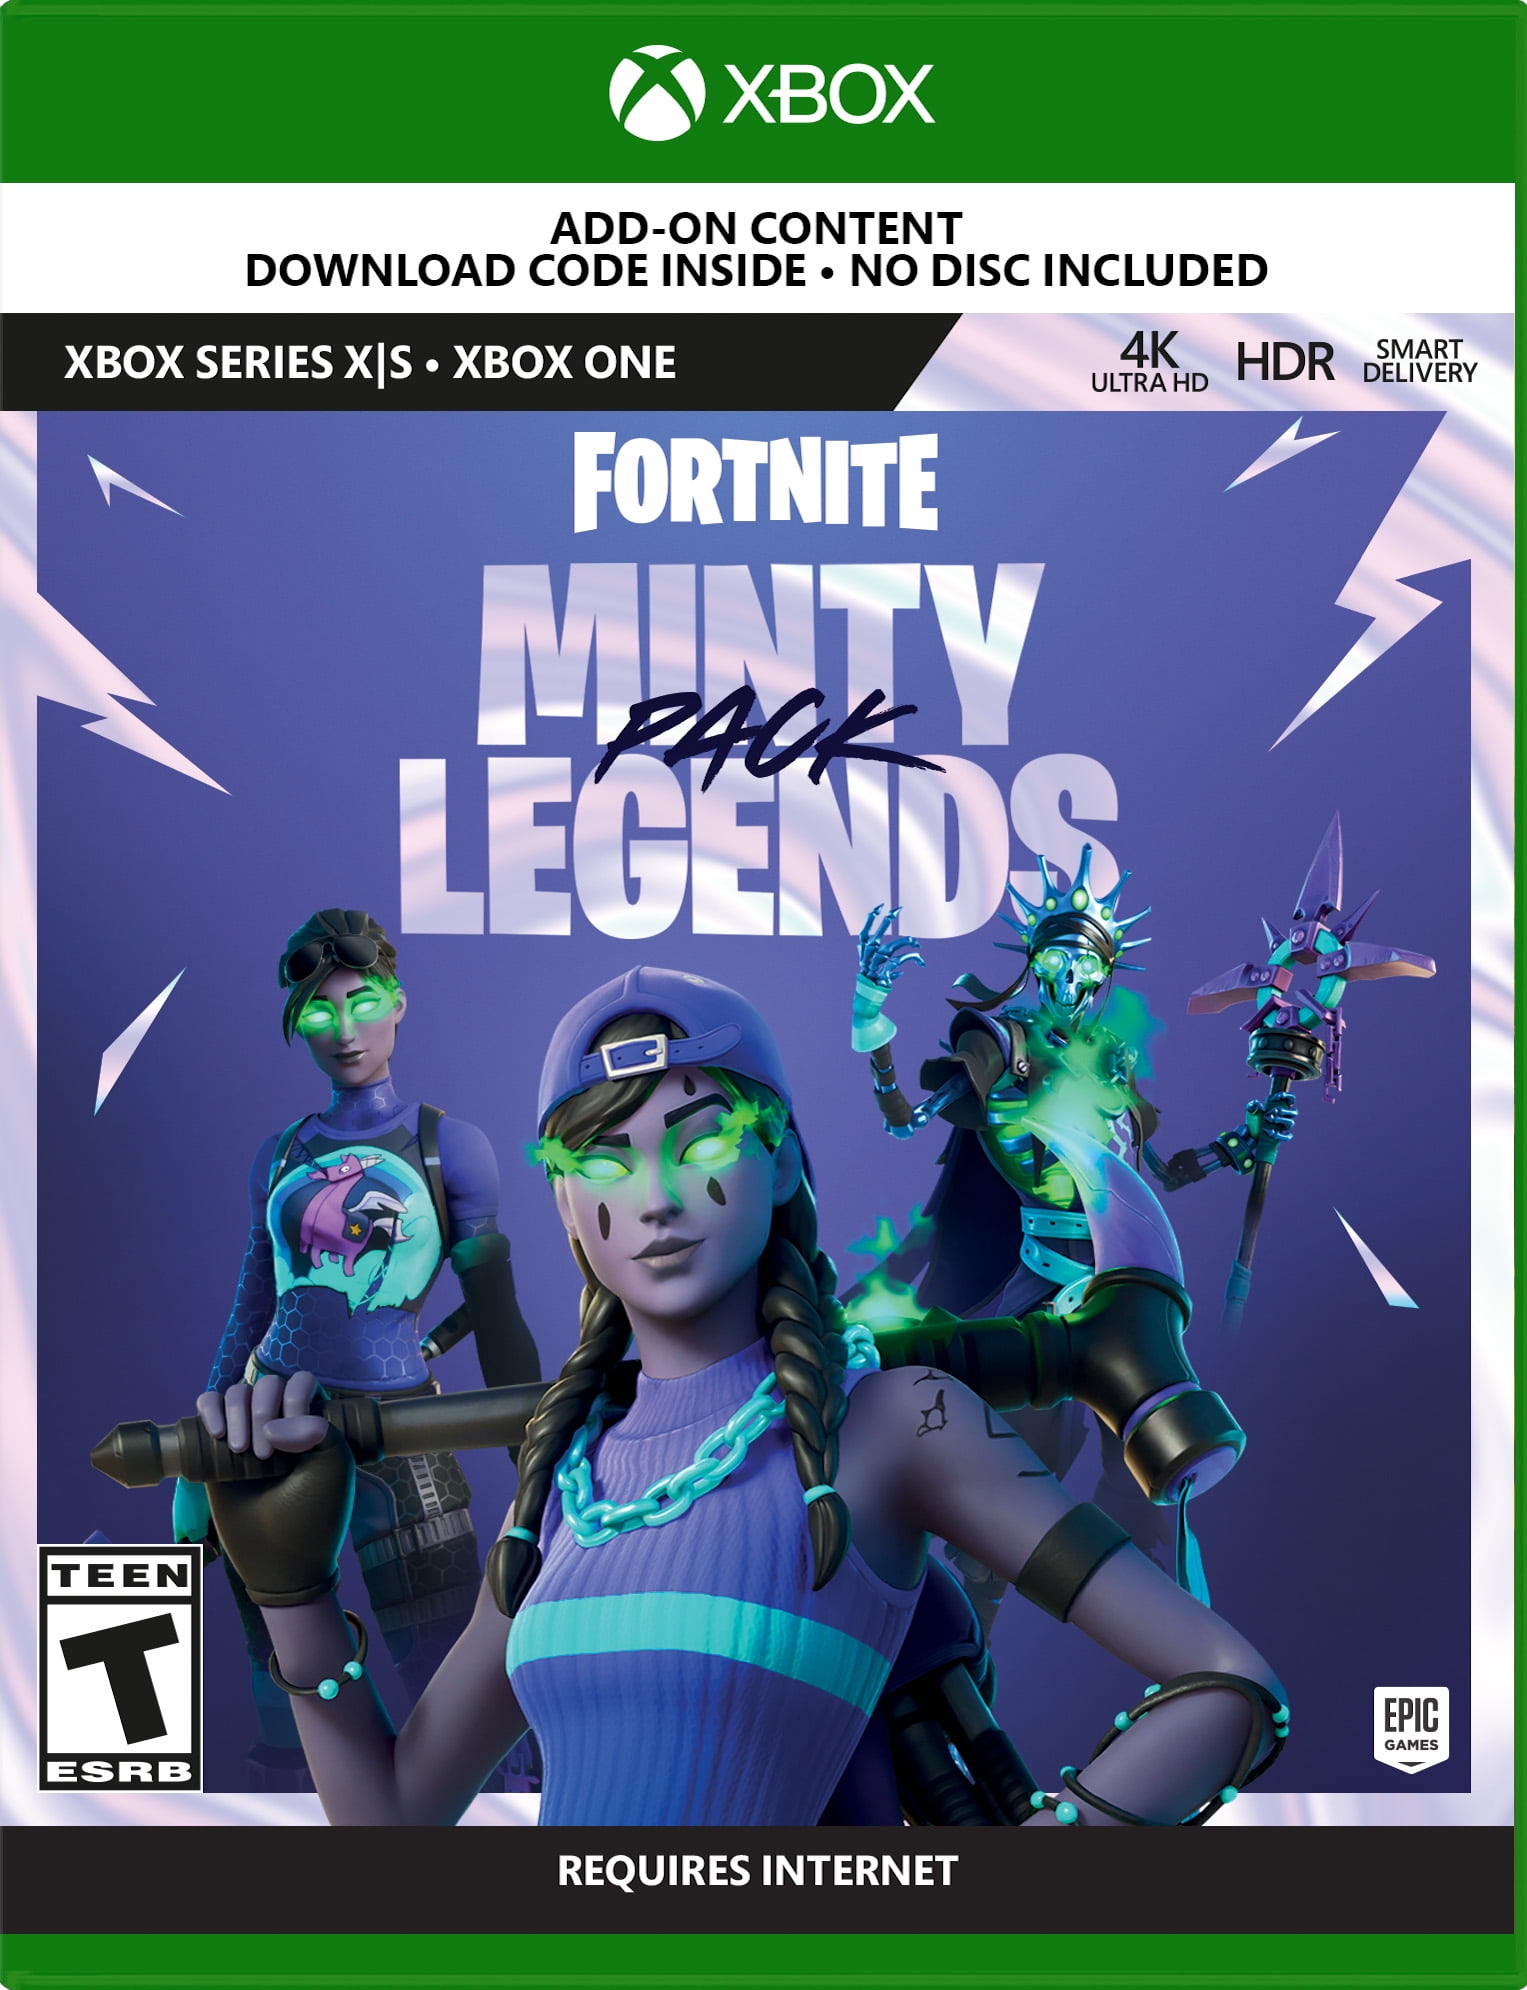 Epic Games Publishing Fortnite Minty Legends Pack, Xbox Series X